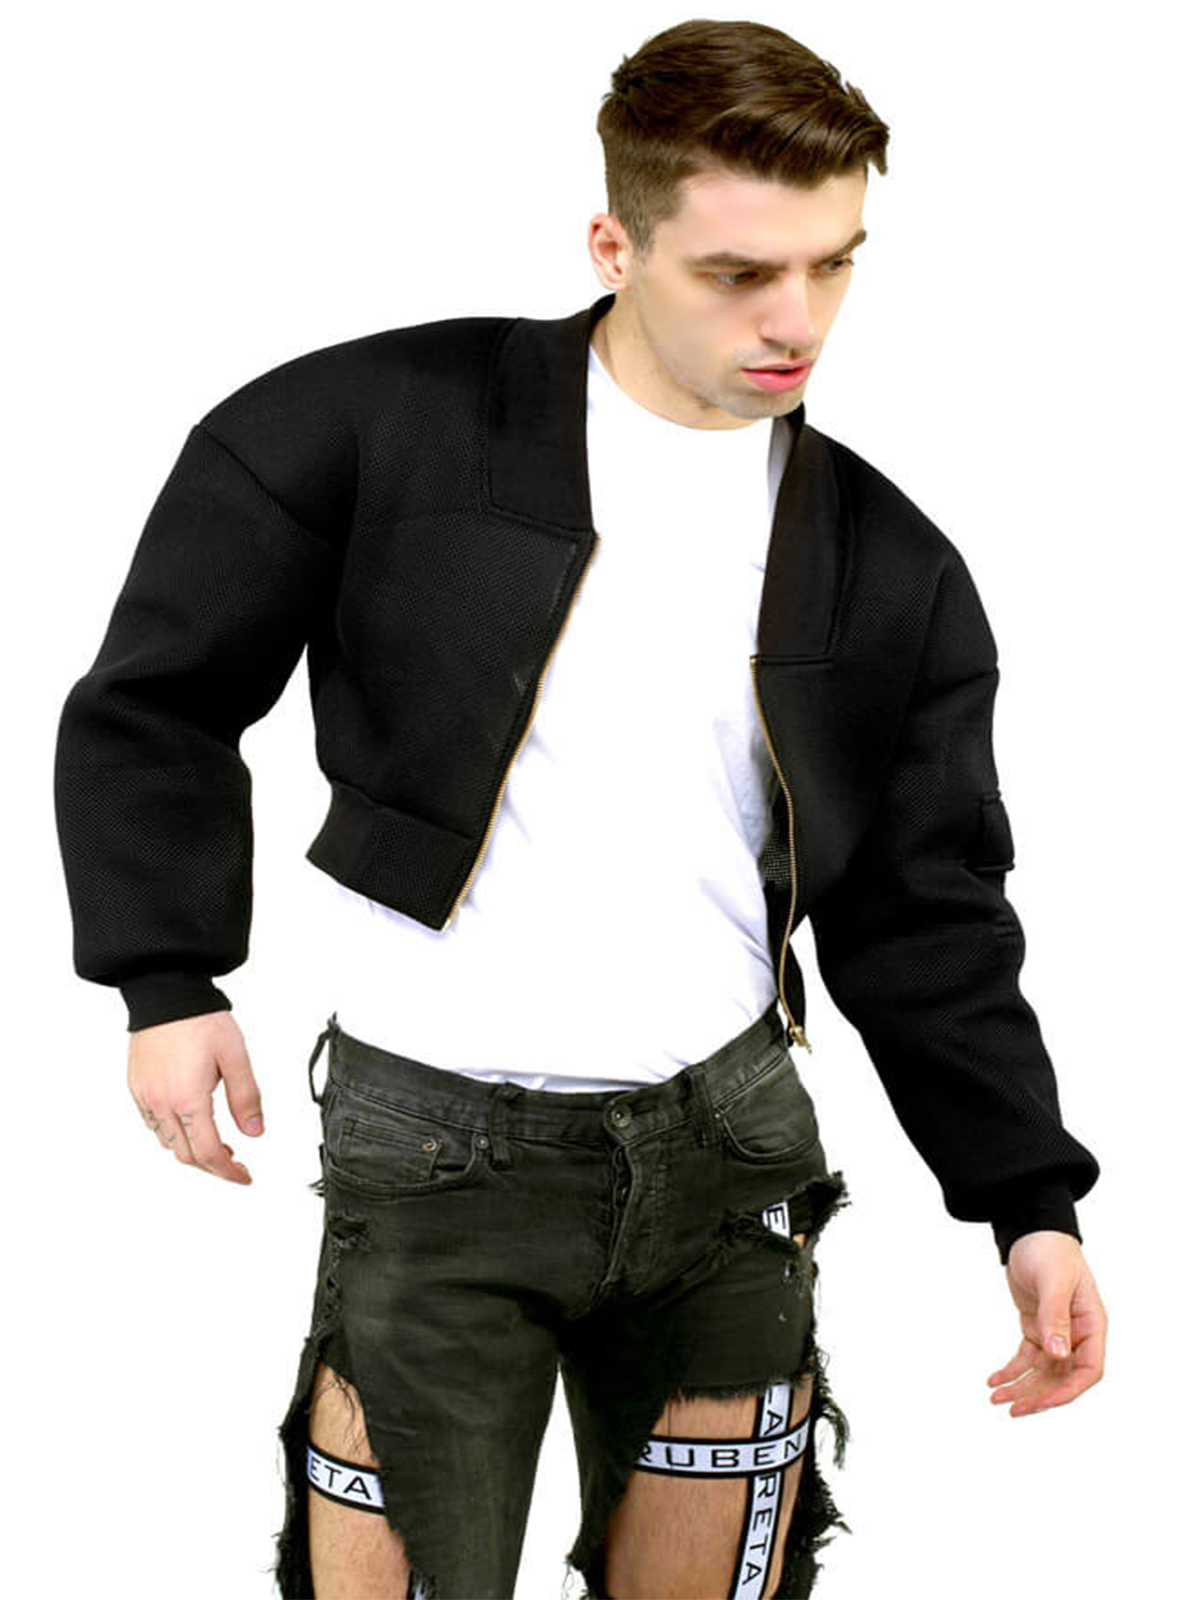 Men cropped top outfit aesthetic  Cropped jacket outfit, Crop top